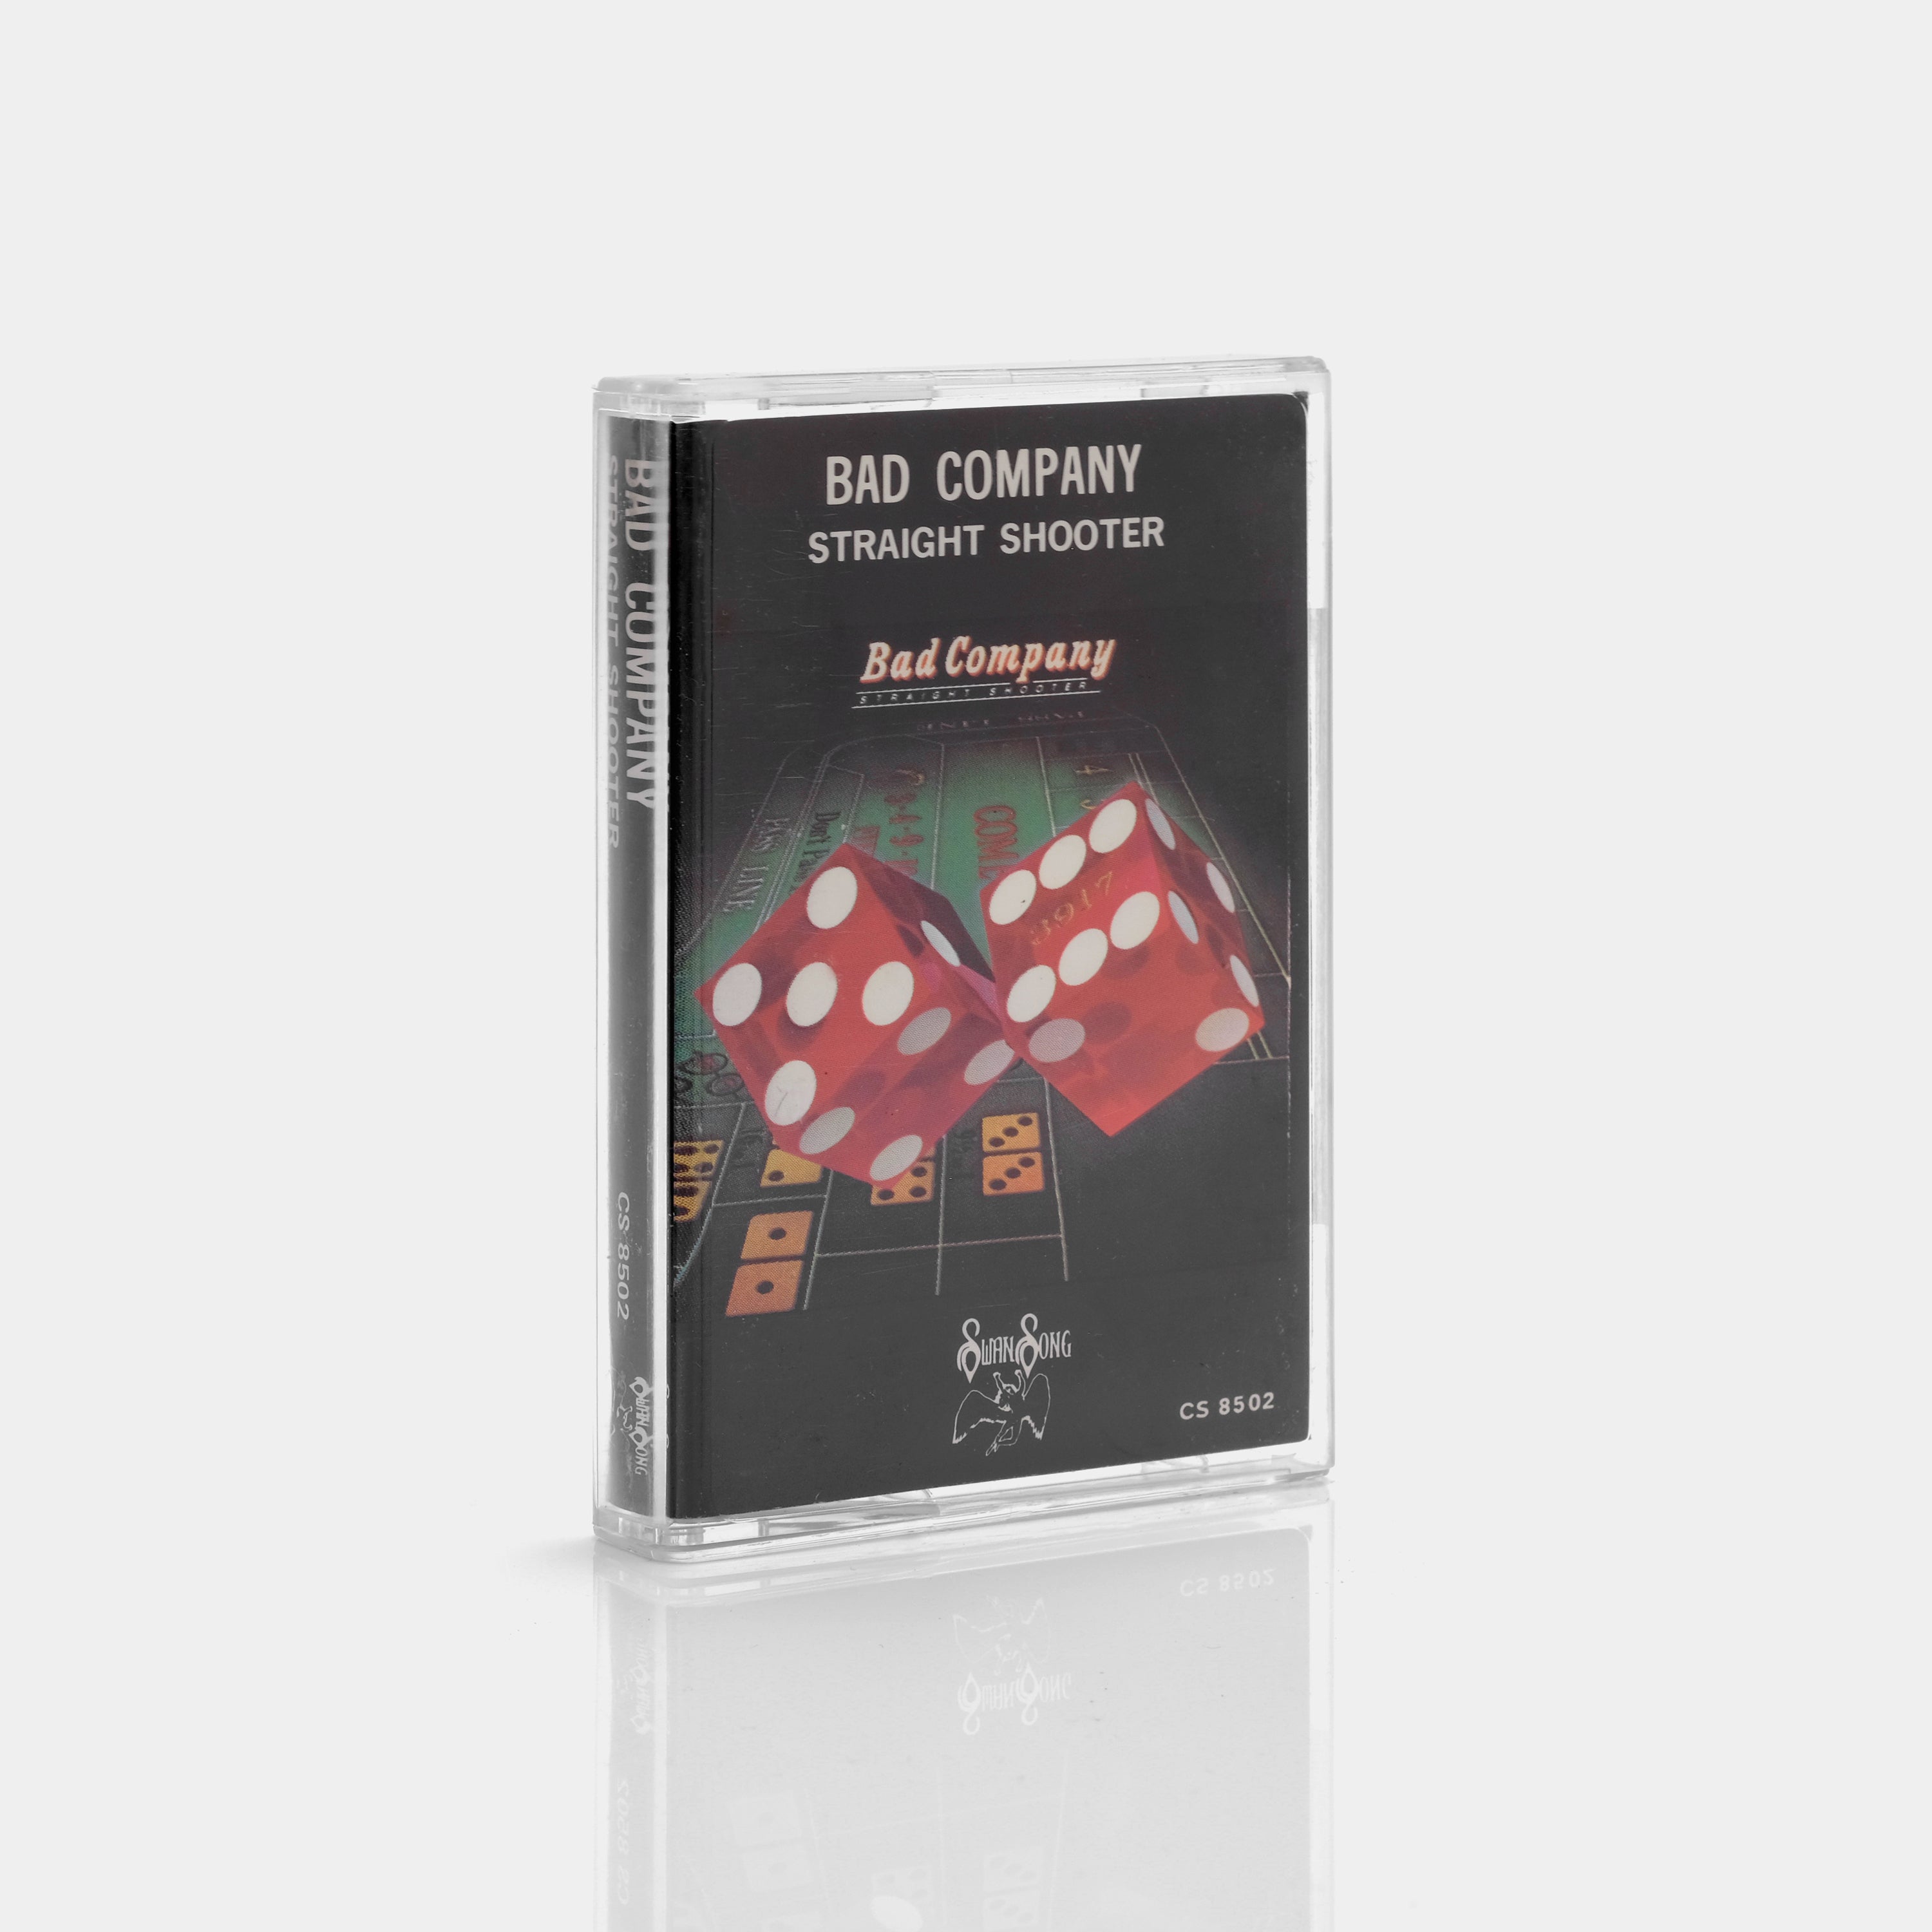 Bad Company - Straight Shooter Cassette Tape